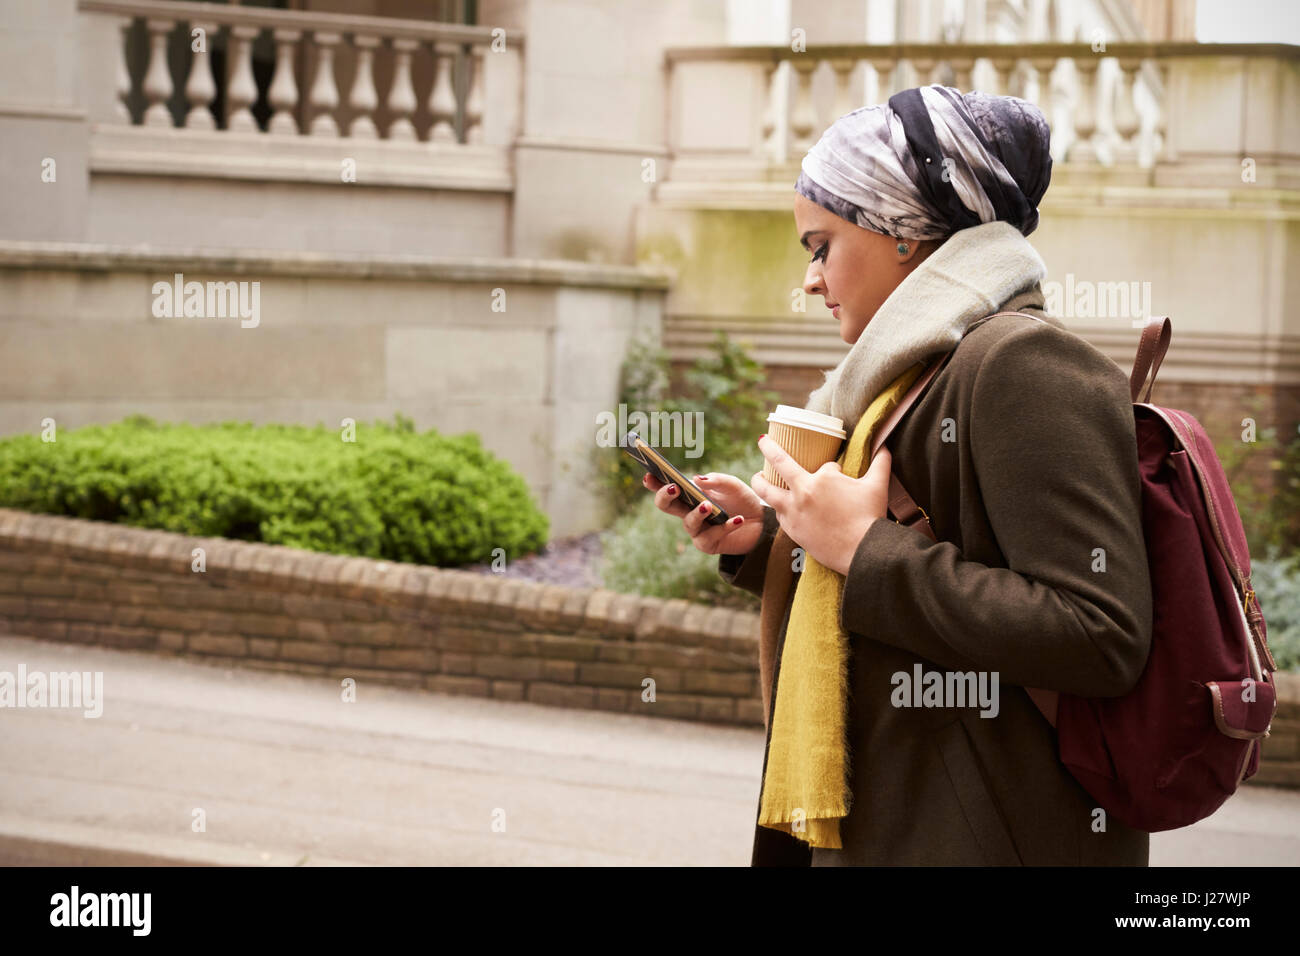 British Muslim Female Walks And Sends Text Message In City Stock Photo